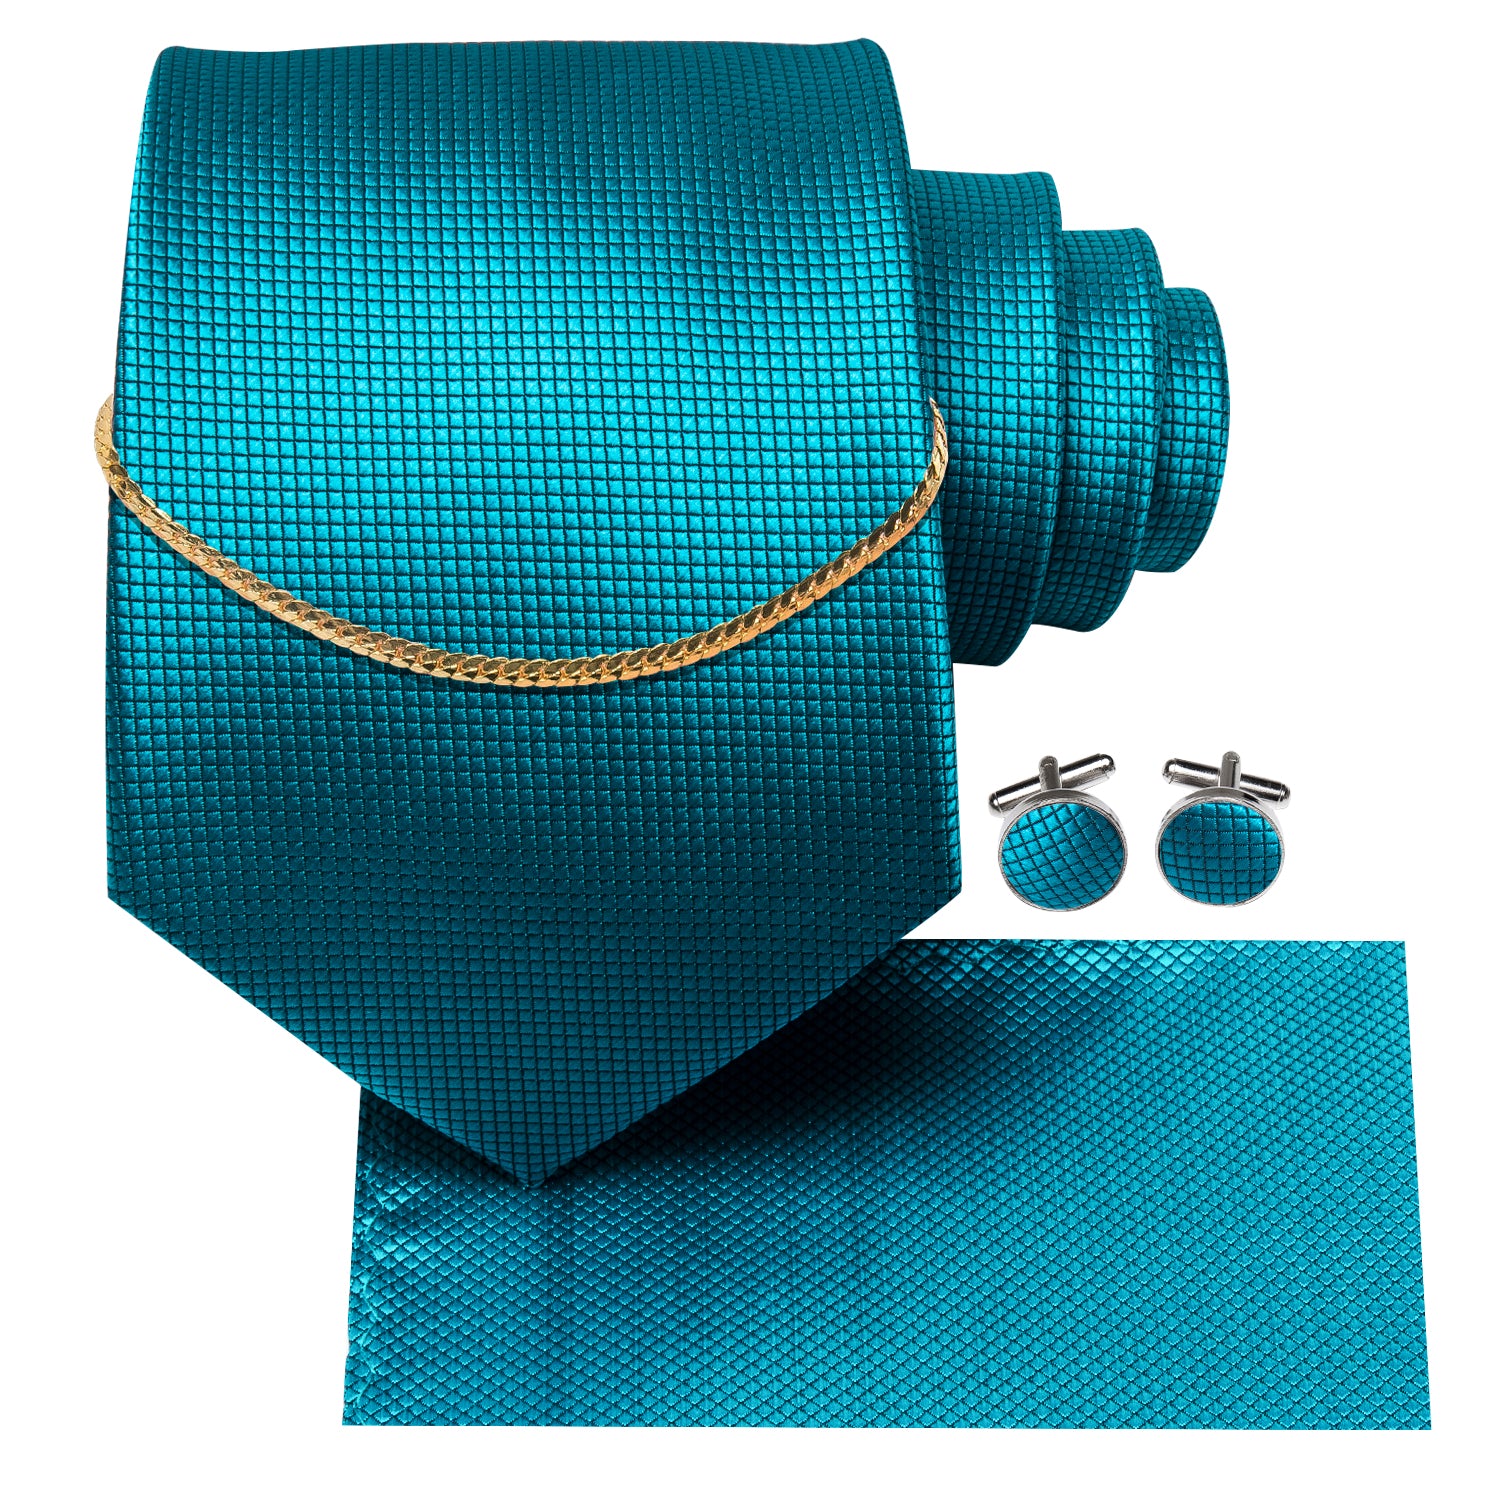 Teal Blue Solid Tie Pocket Square Cufflinks Set With Golden Chain